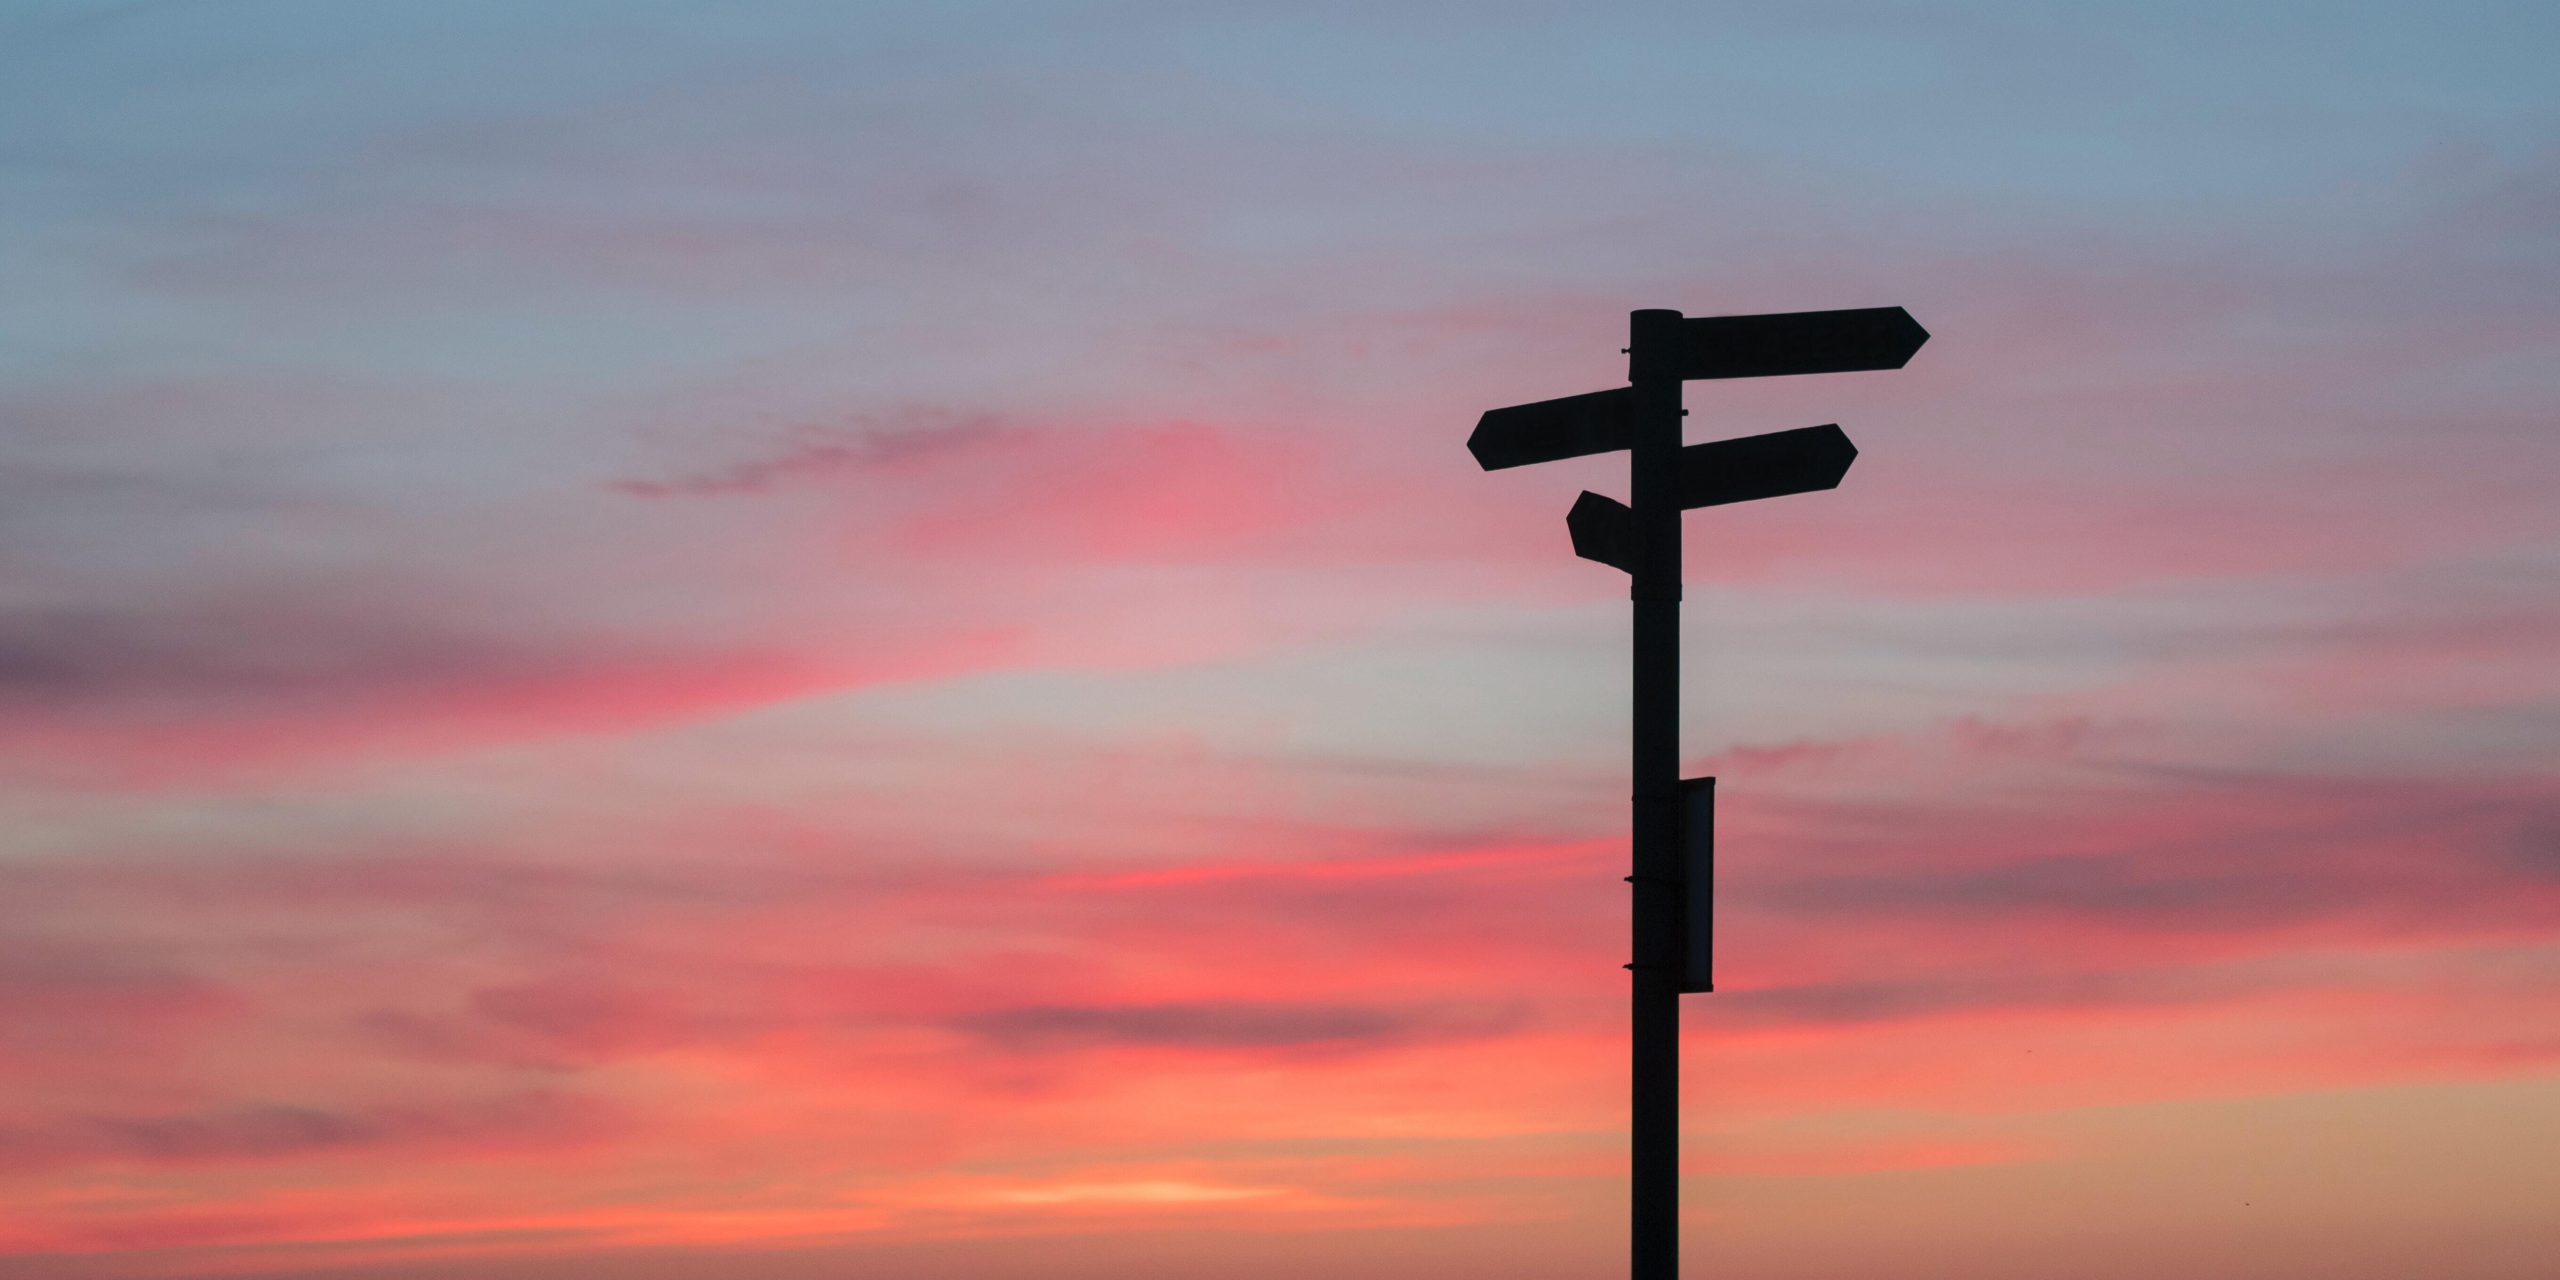 Silhouette of a signpost against the sunset